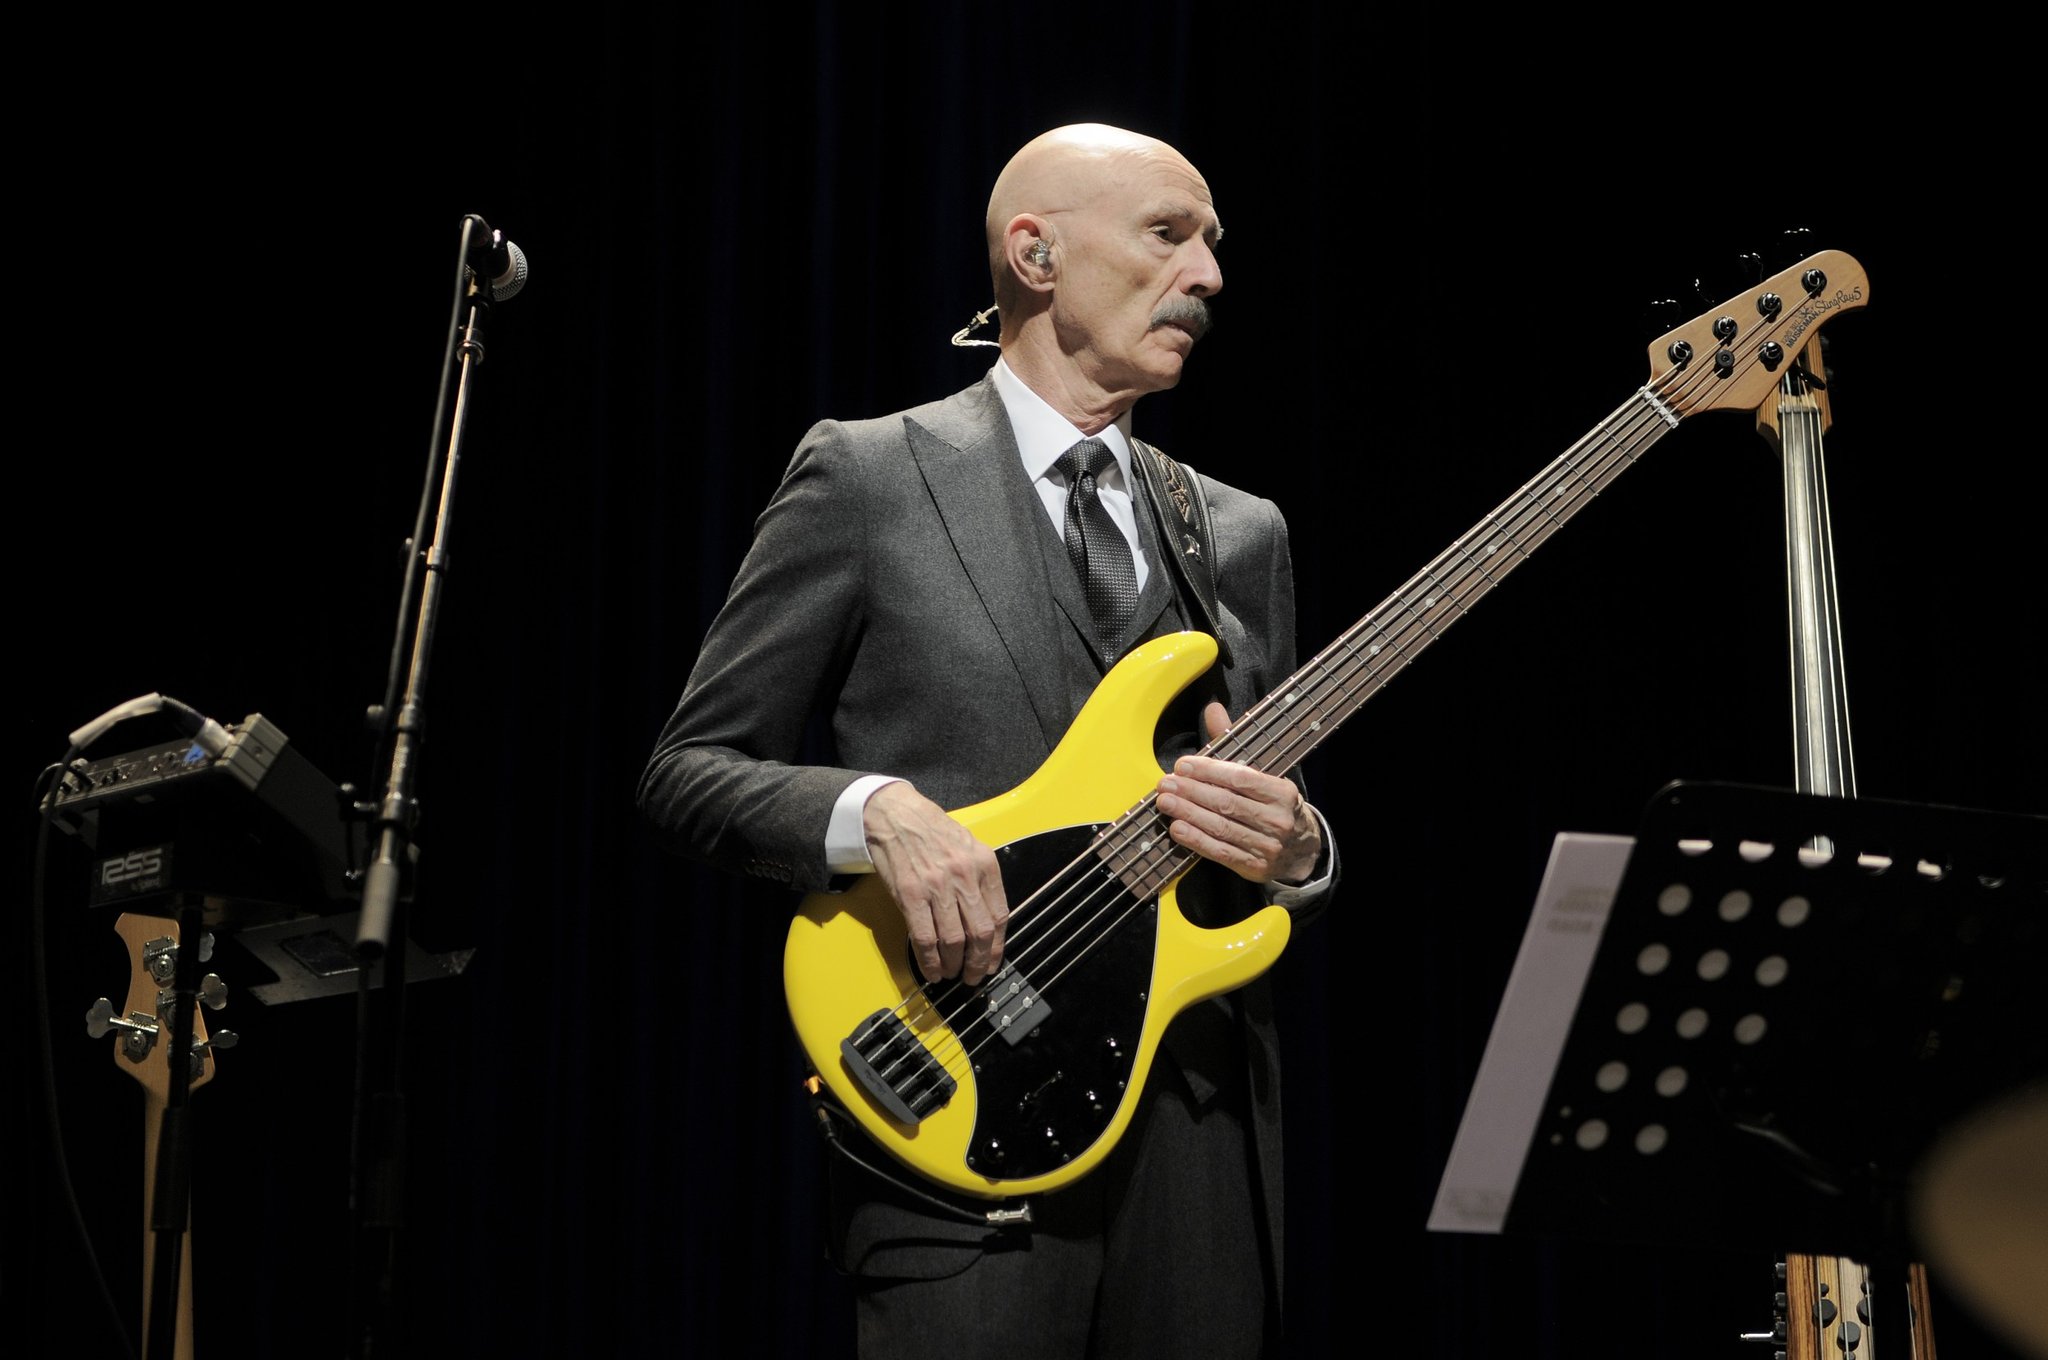 Belated happy birthday to Tony Levin, one of the greatest bass players around. He was 75 years young yesterday. 